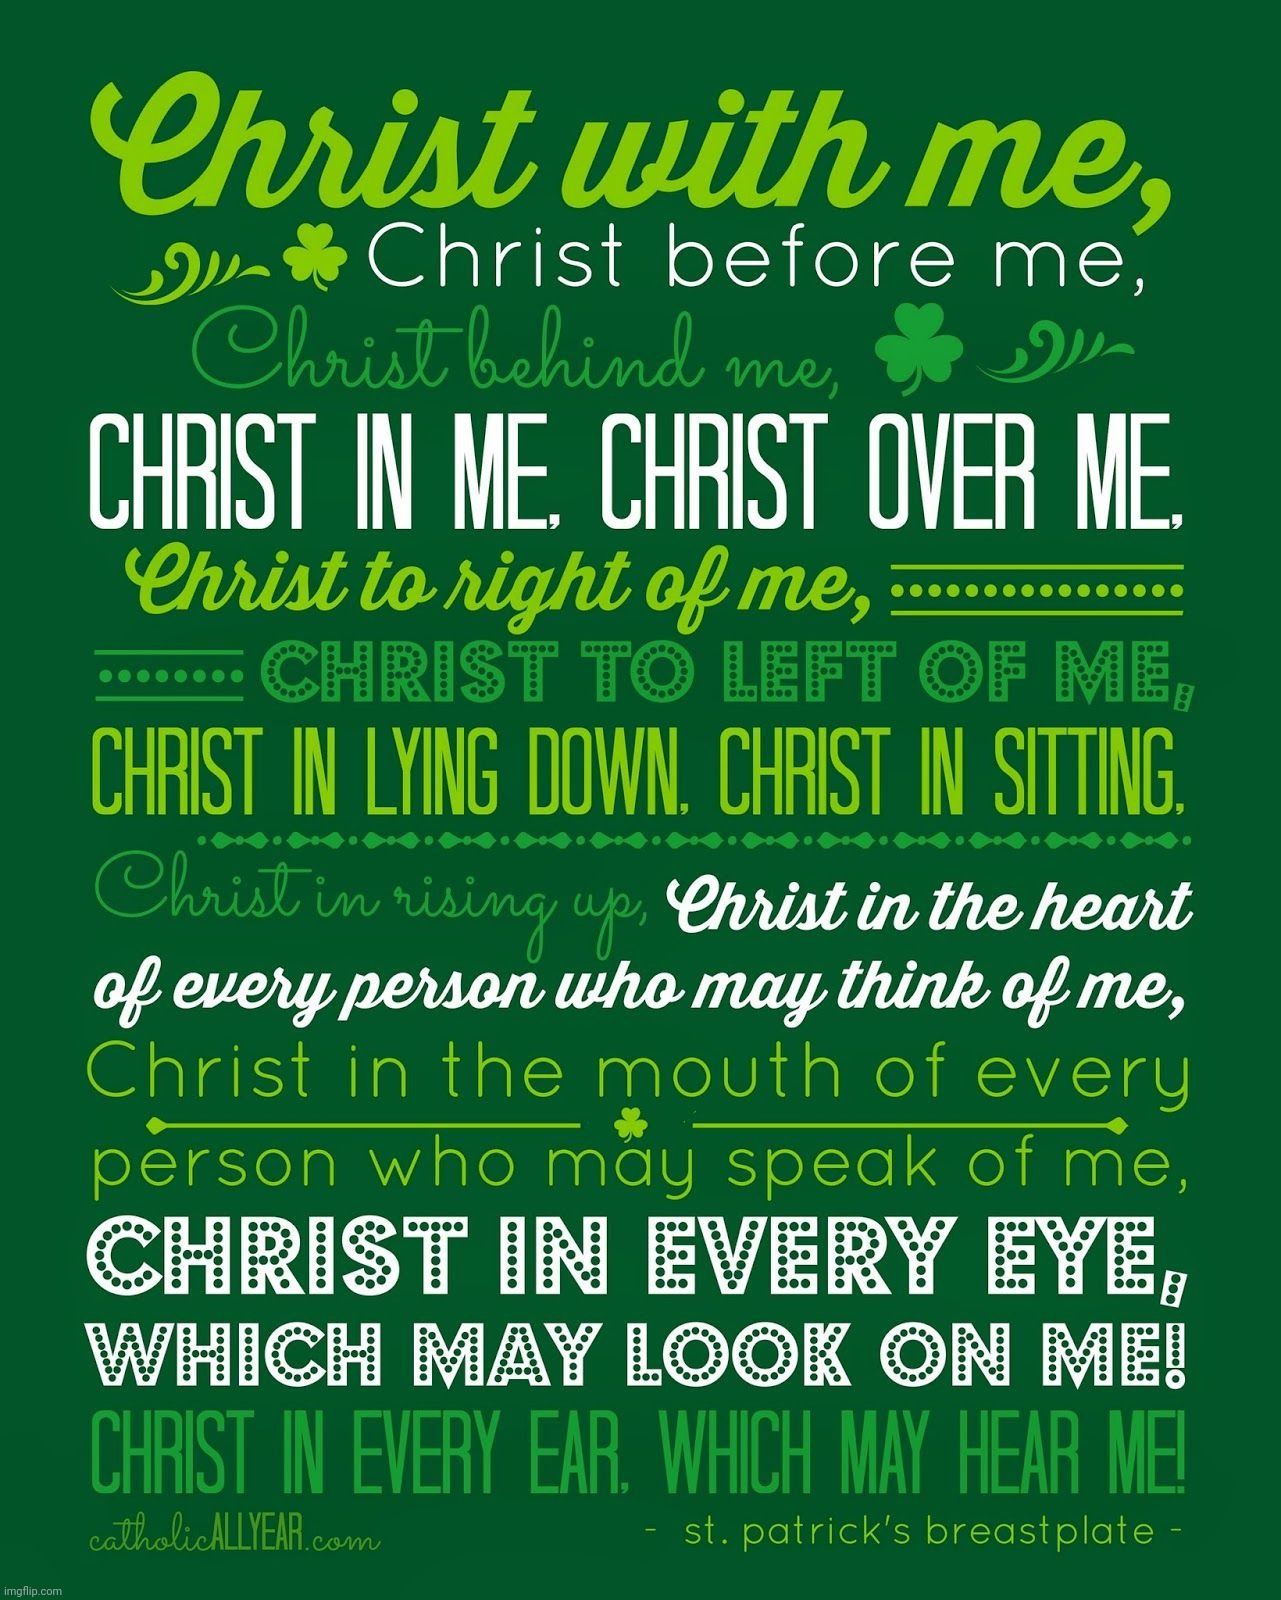 Prayer of St. Patrick | image tagged in st patrick's day | made w/ Imgflip meme maker